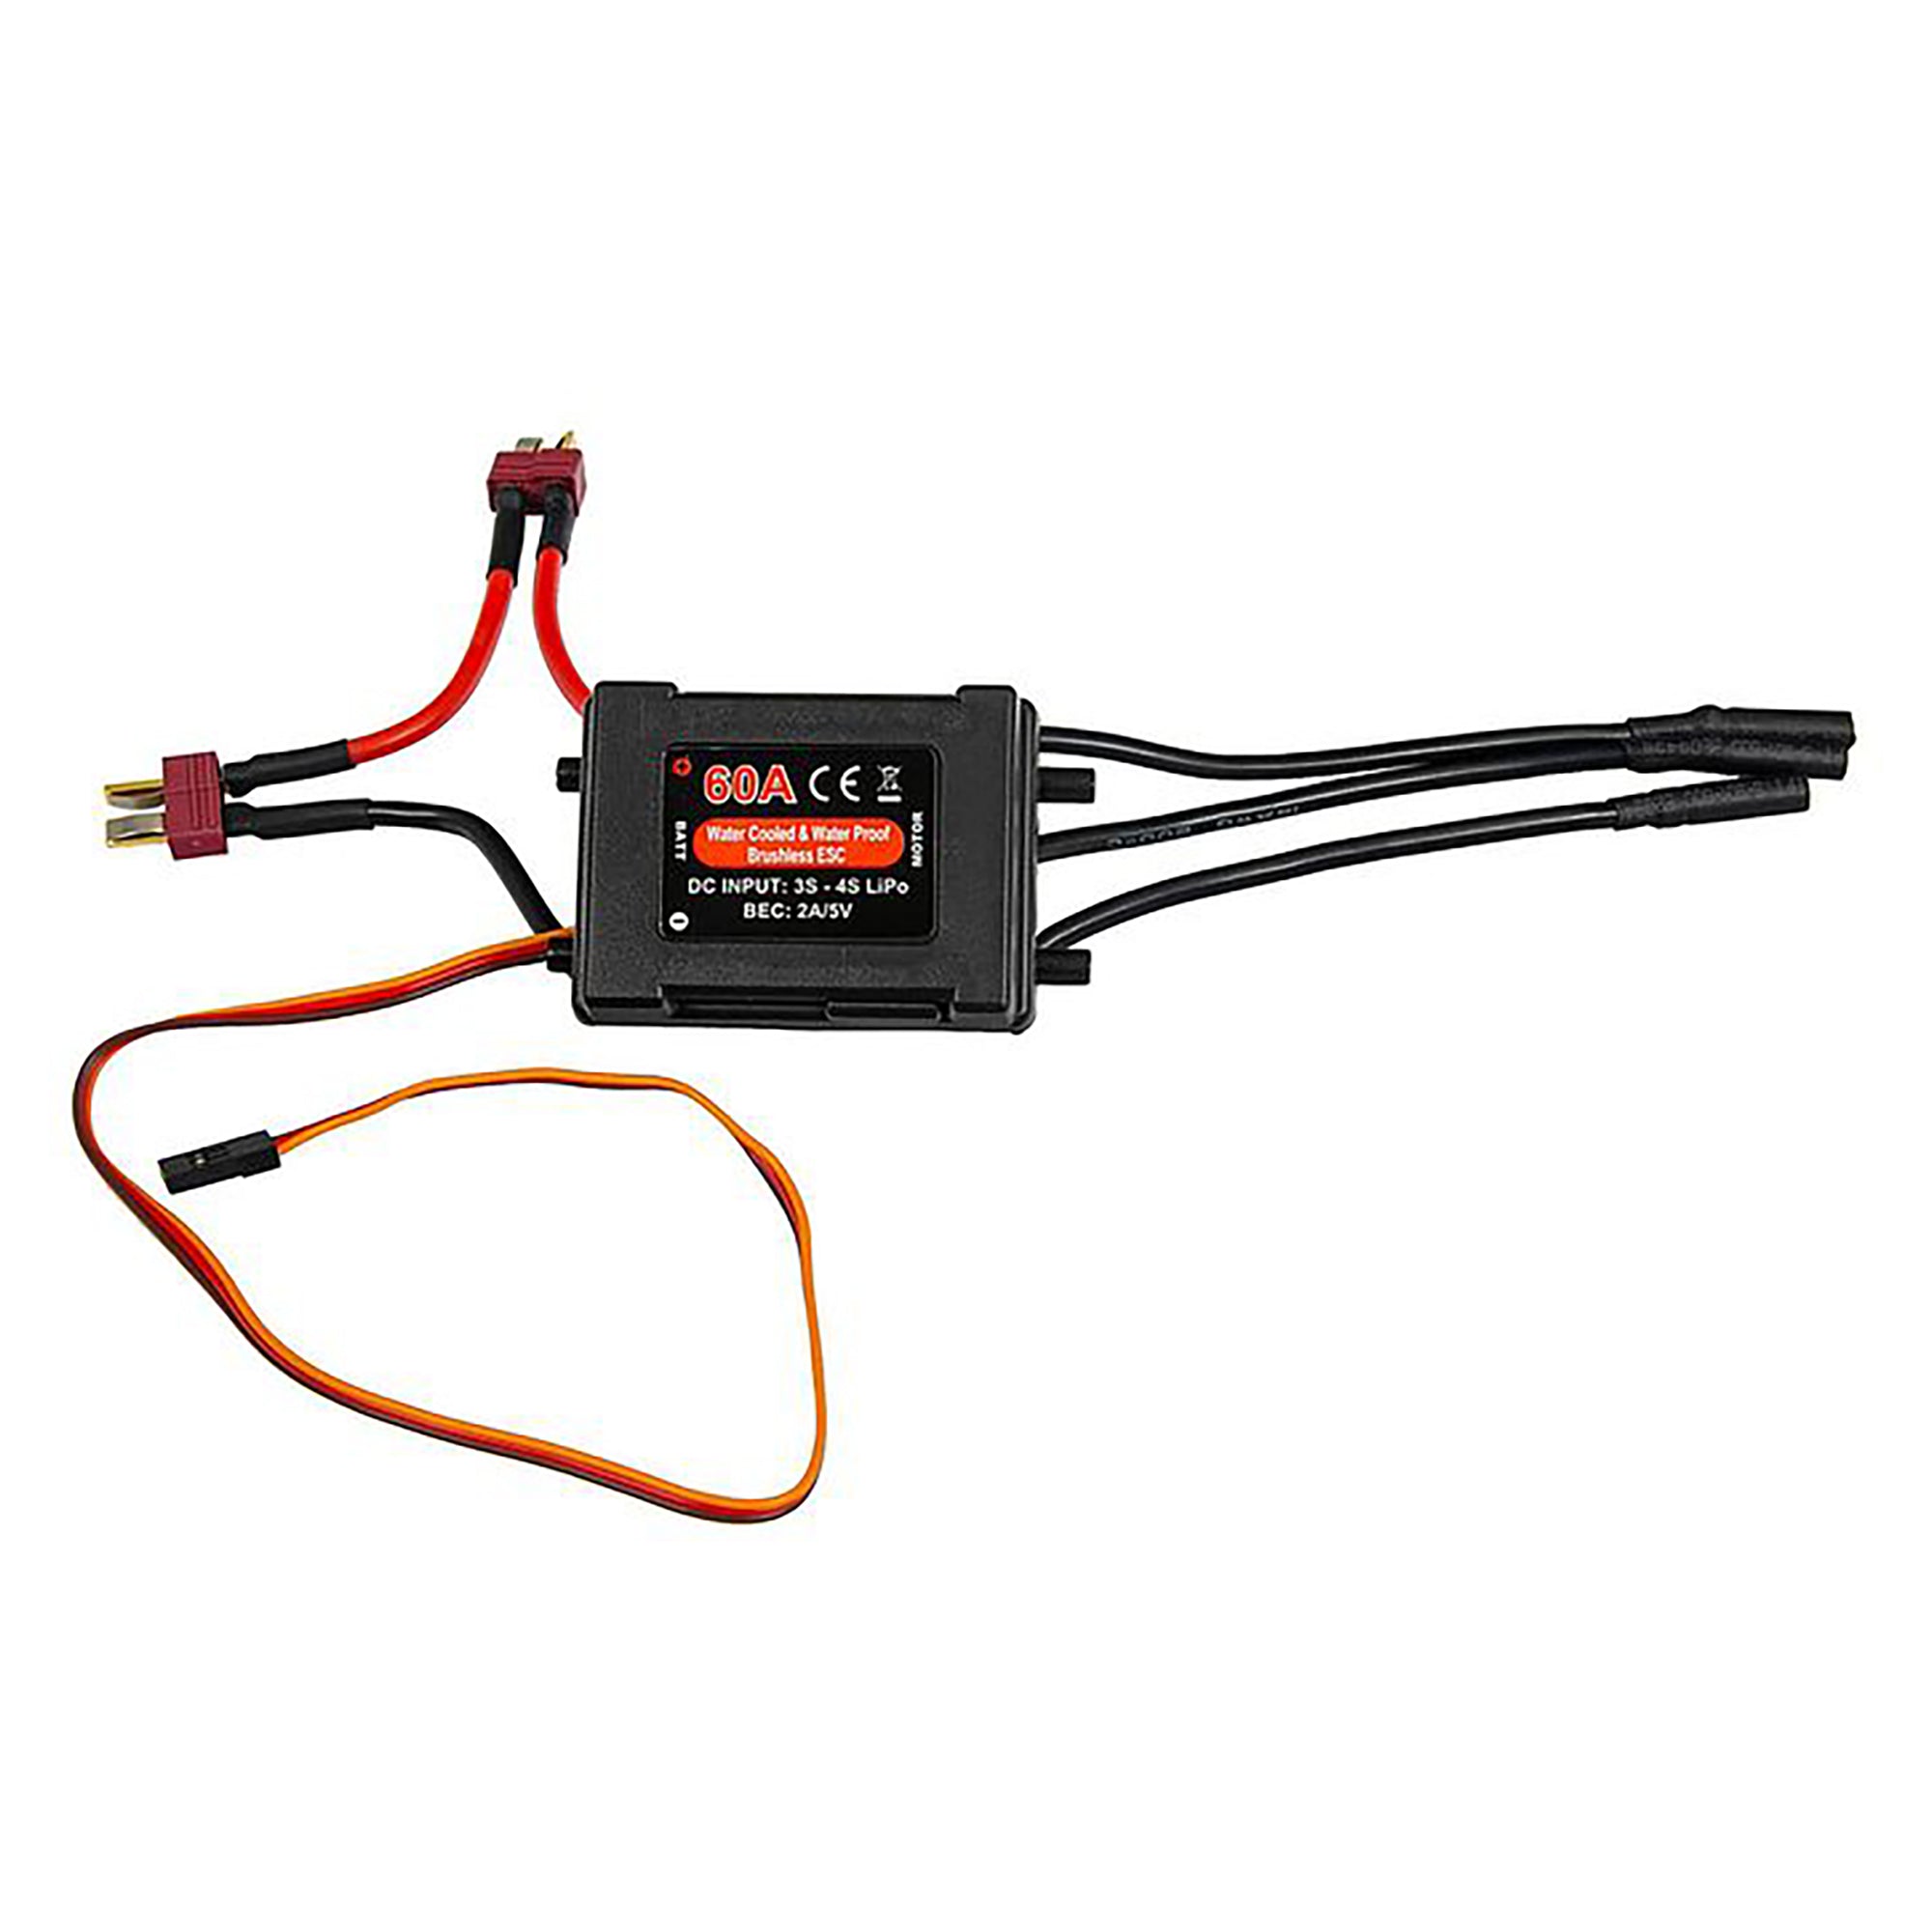 Joysway 830122 60A Water Cooled Brushless ESC with Two Dean Connectors